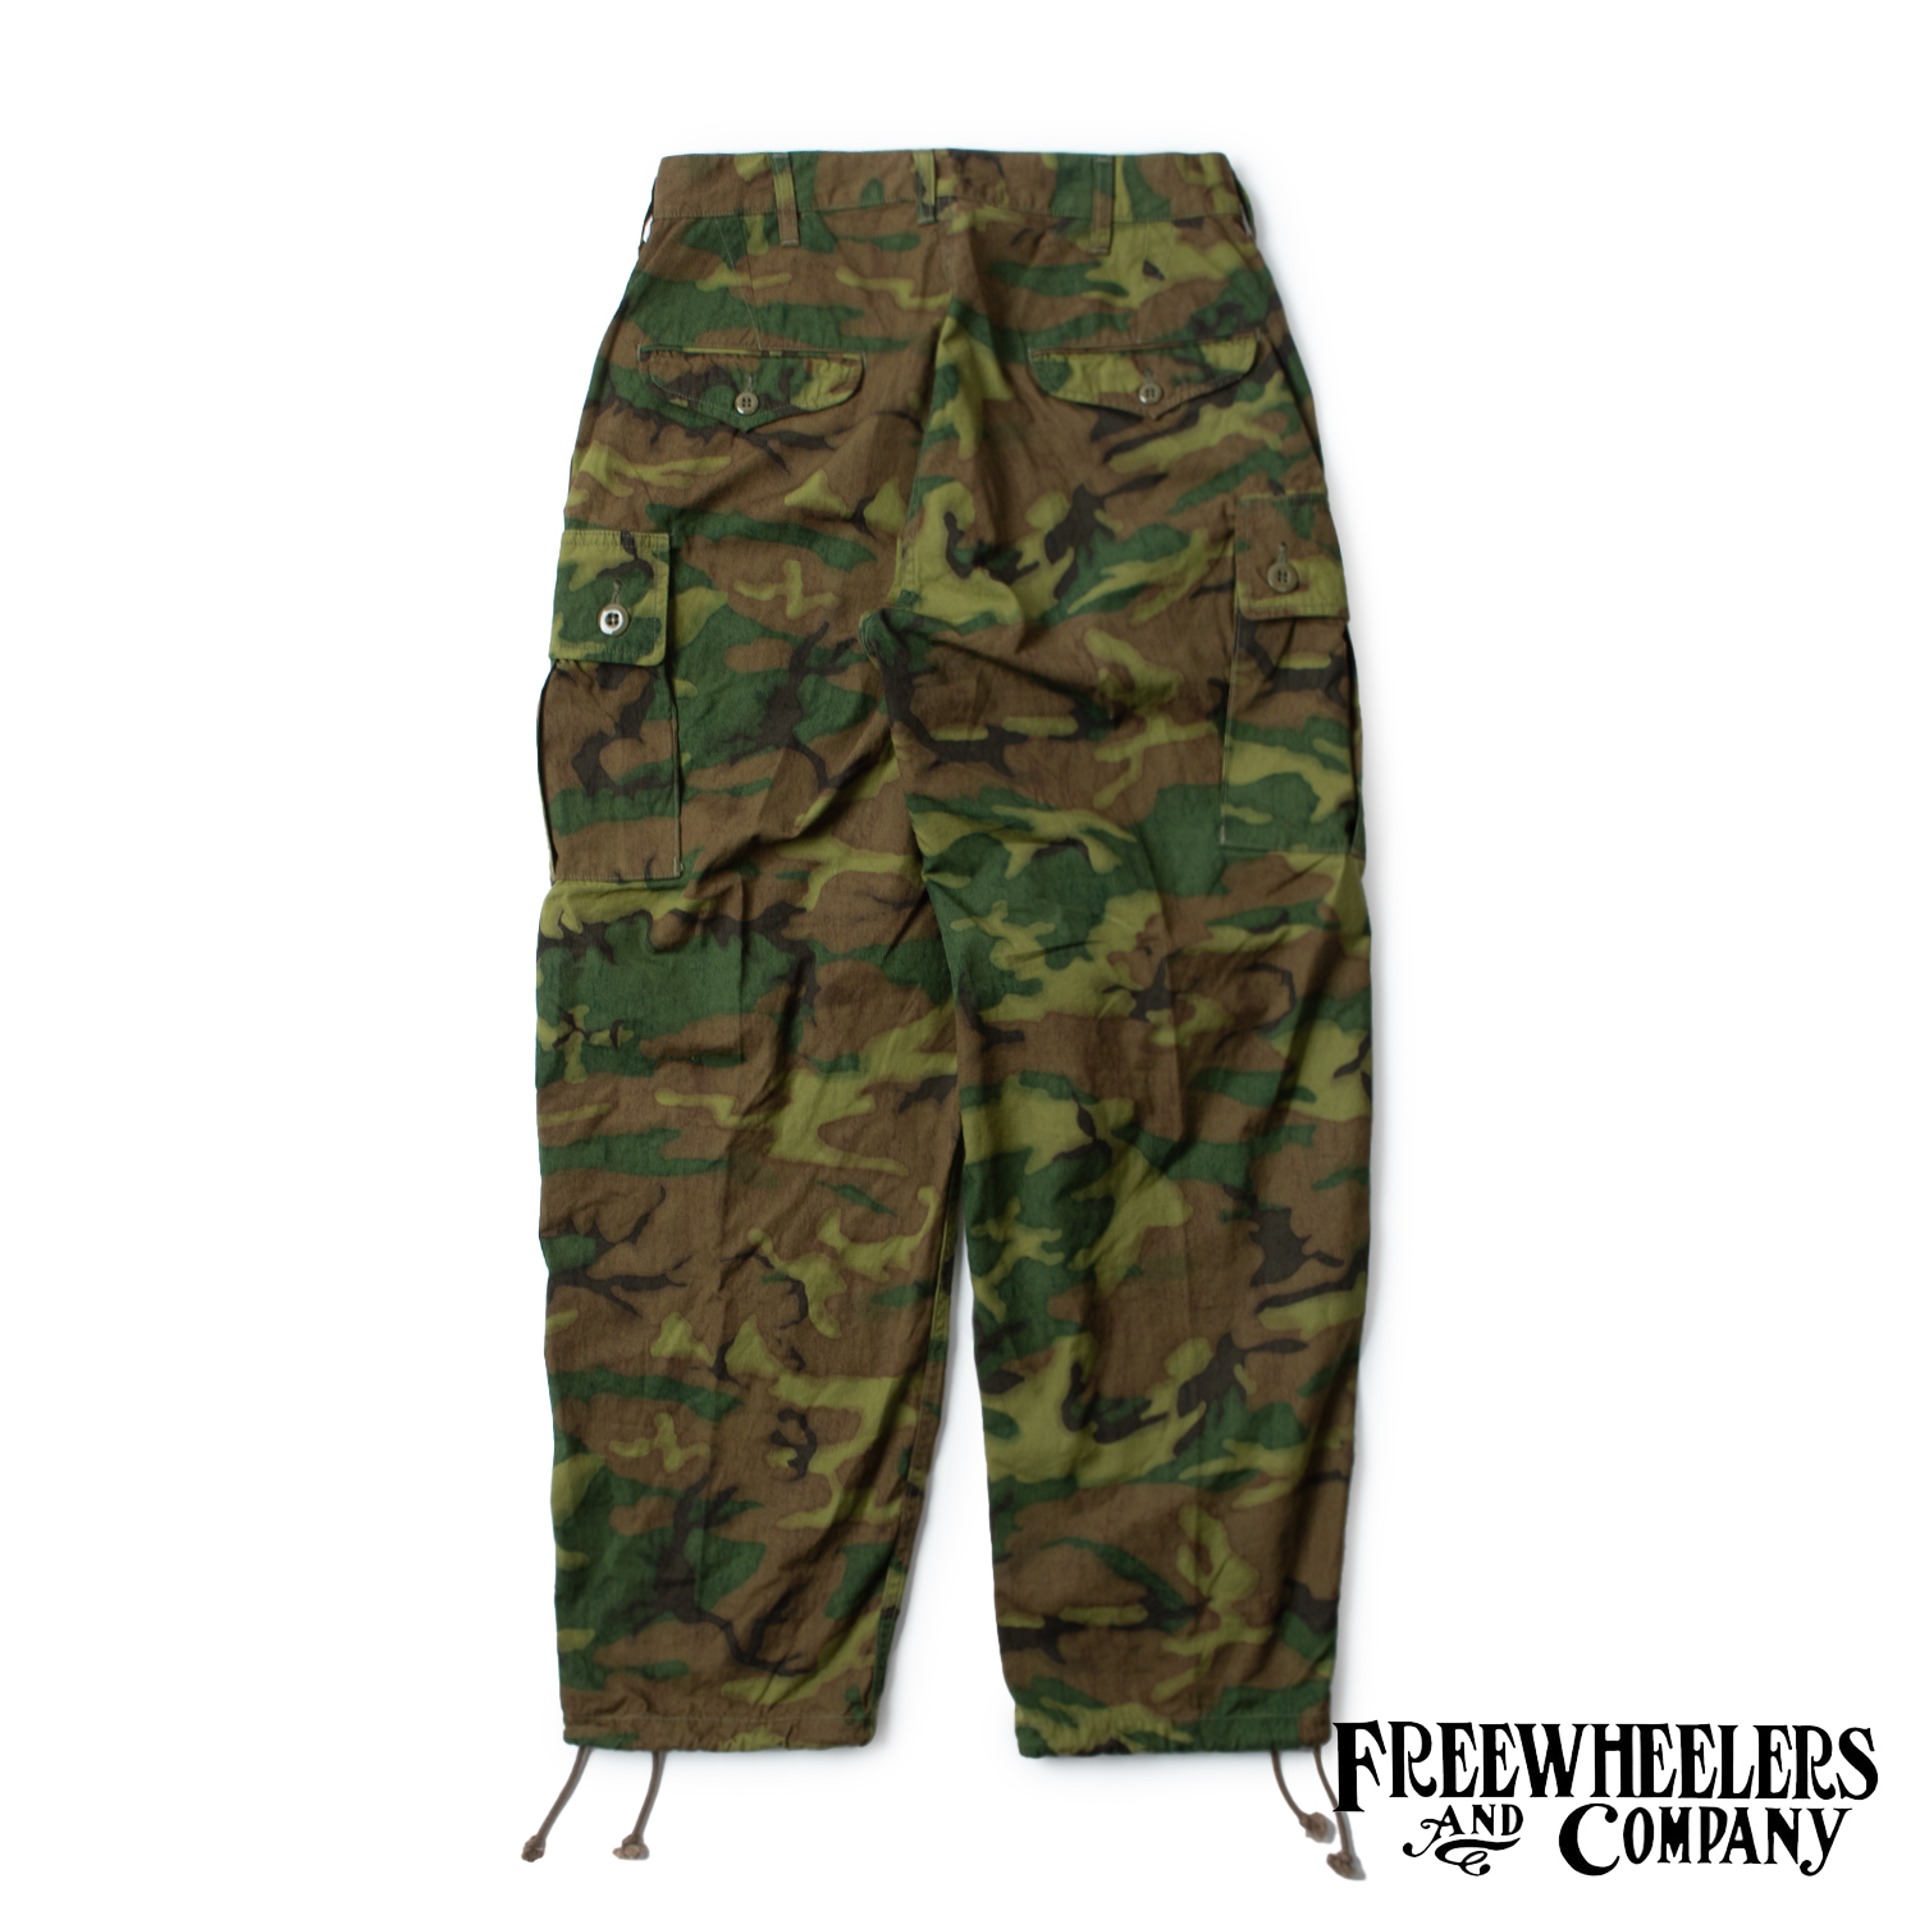  [UNION SPECIAL OVERALLS]   Military Tropical Trousers  “JUNGLE FATIGUES” (ERDL CAMO) (5/3 Open)